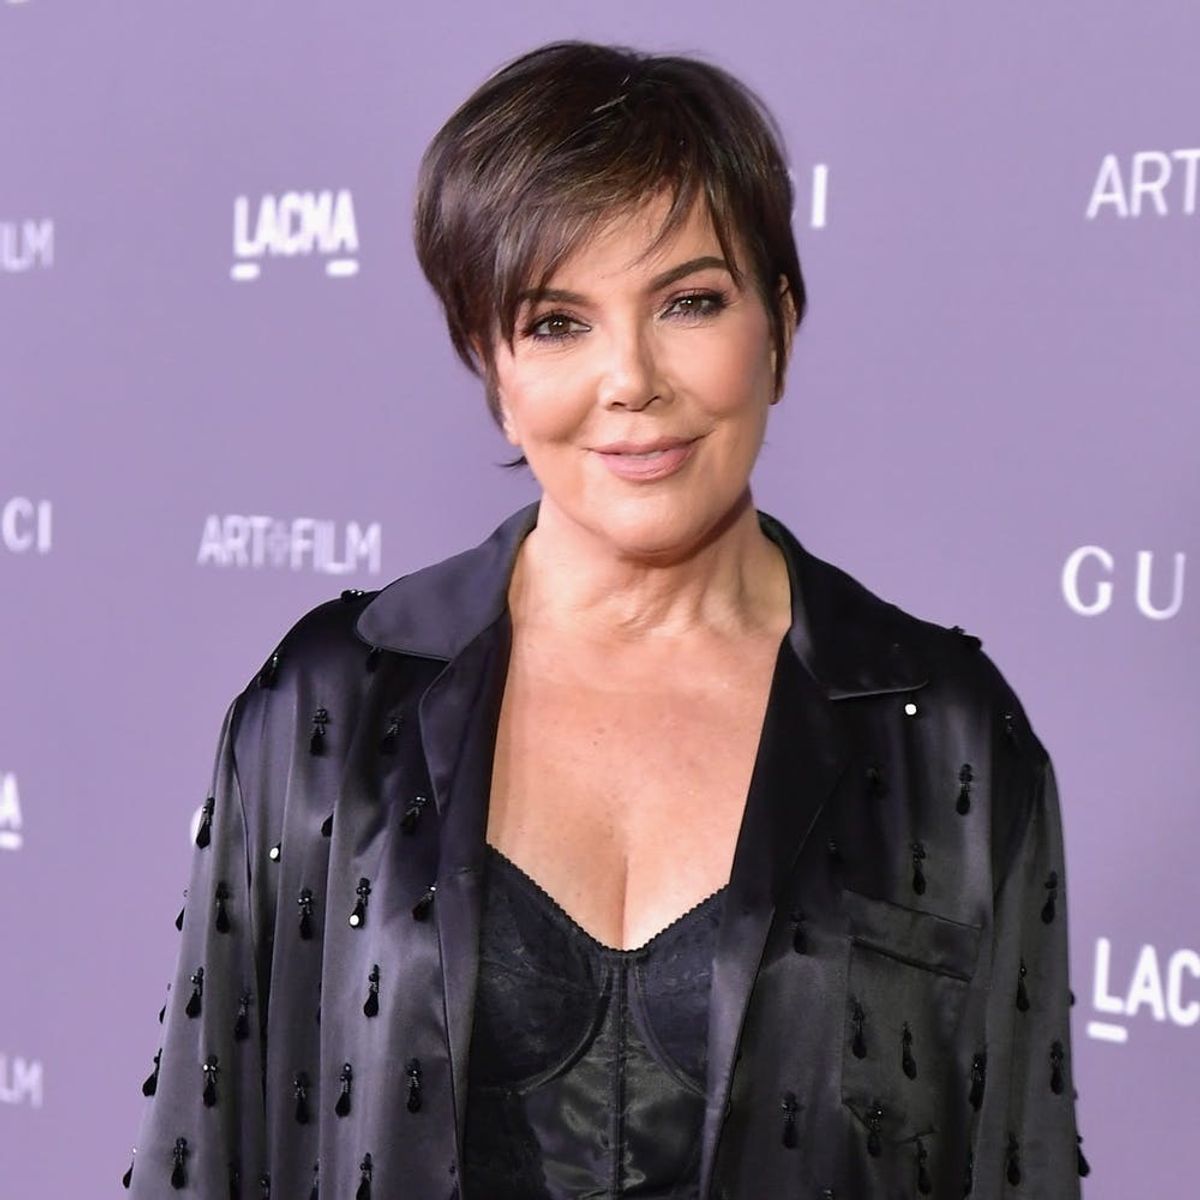 Fans Think Kris Jenner Dropped a Major Hint About the Kylie and Khloe Pregnancy Rumors